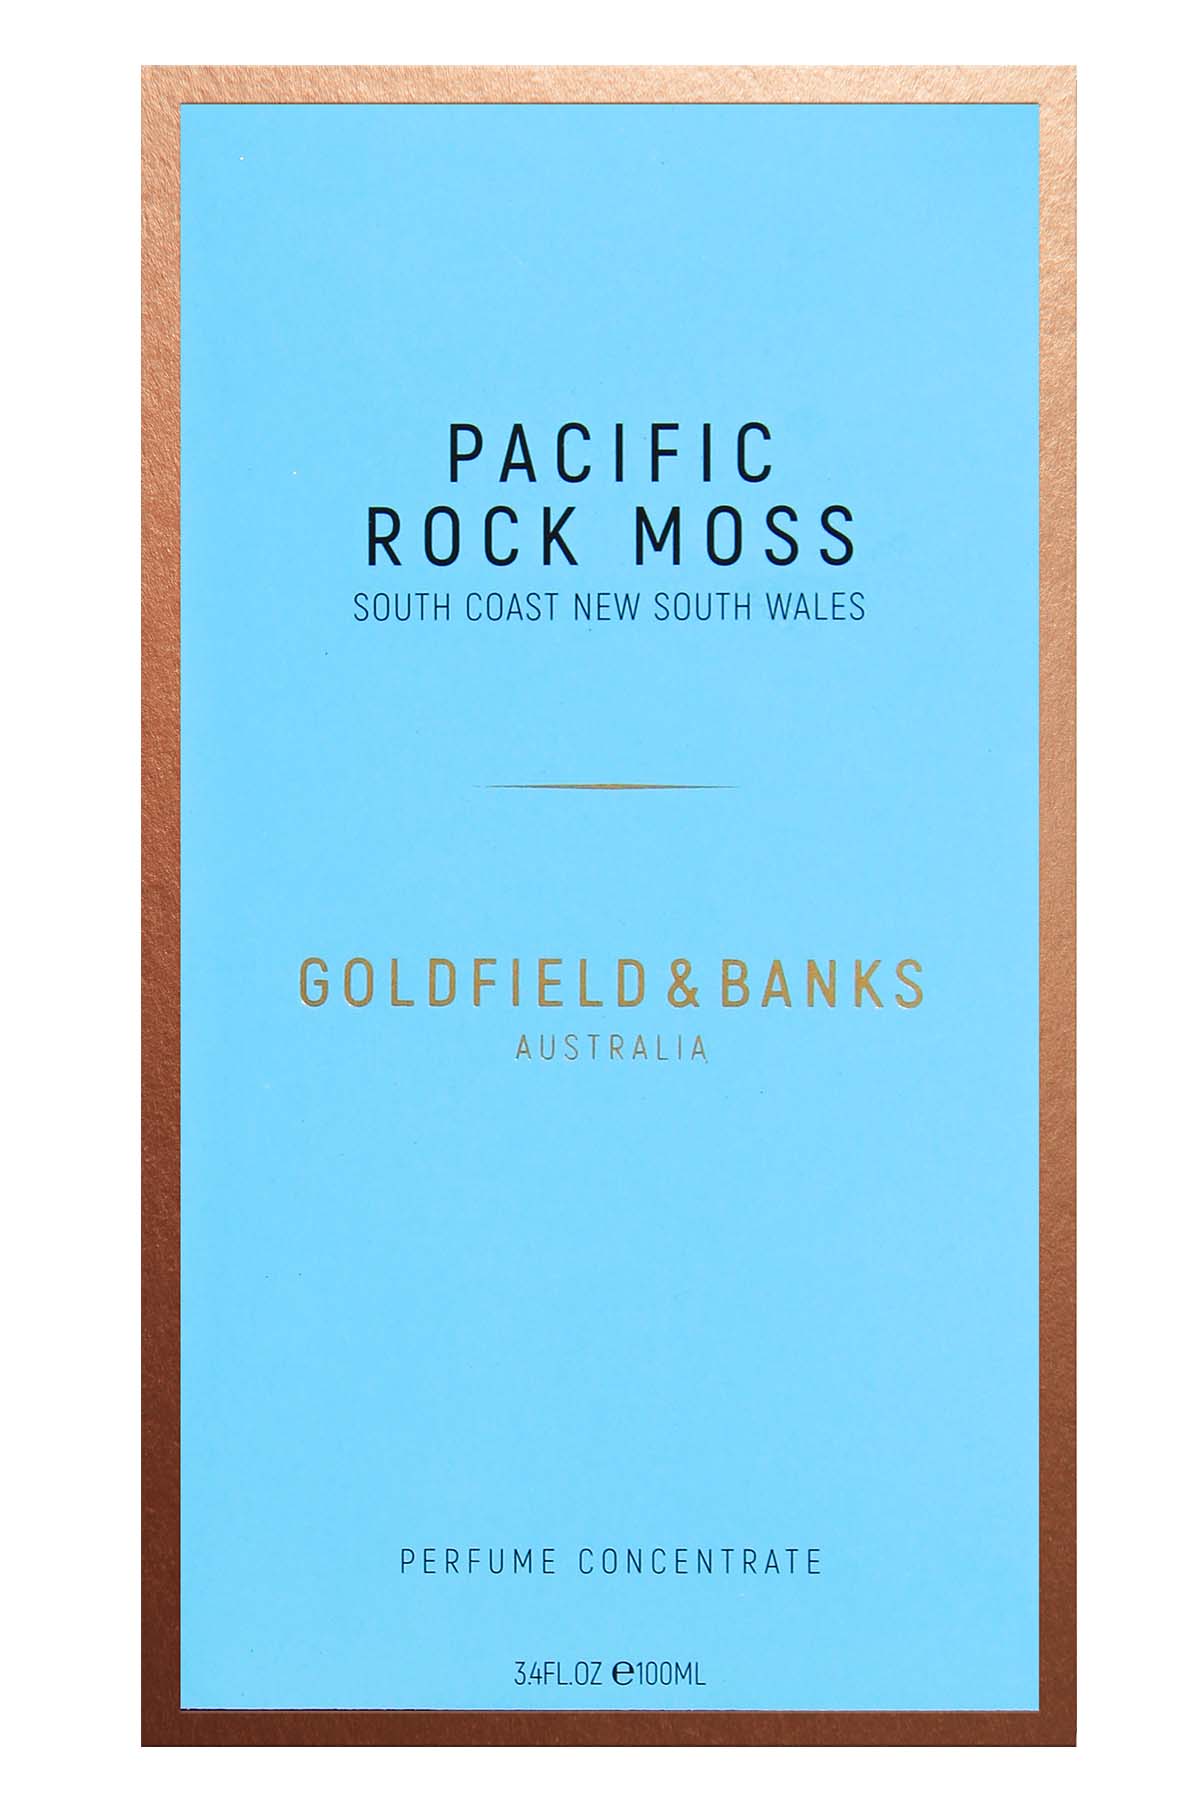 Goldfield & Banks Pacific Rock Moss 100ml Perfume Concentrate Box